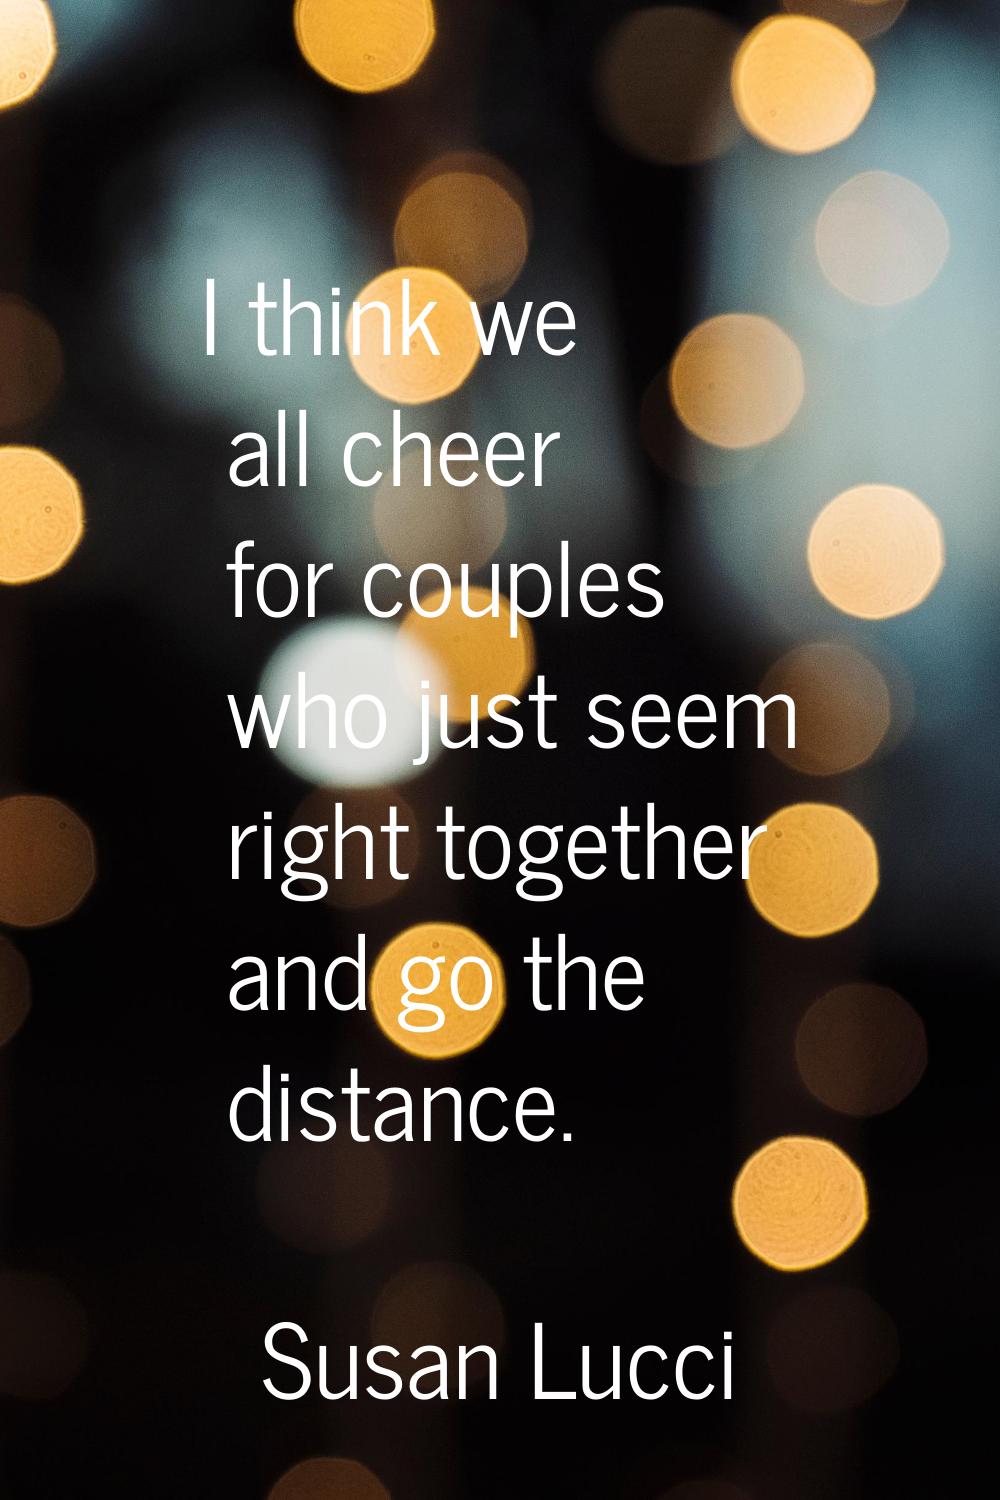 I think we all cheer for couples who just seem right together and go the distance.